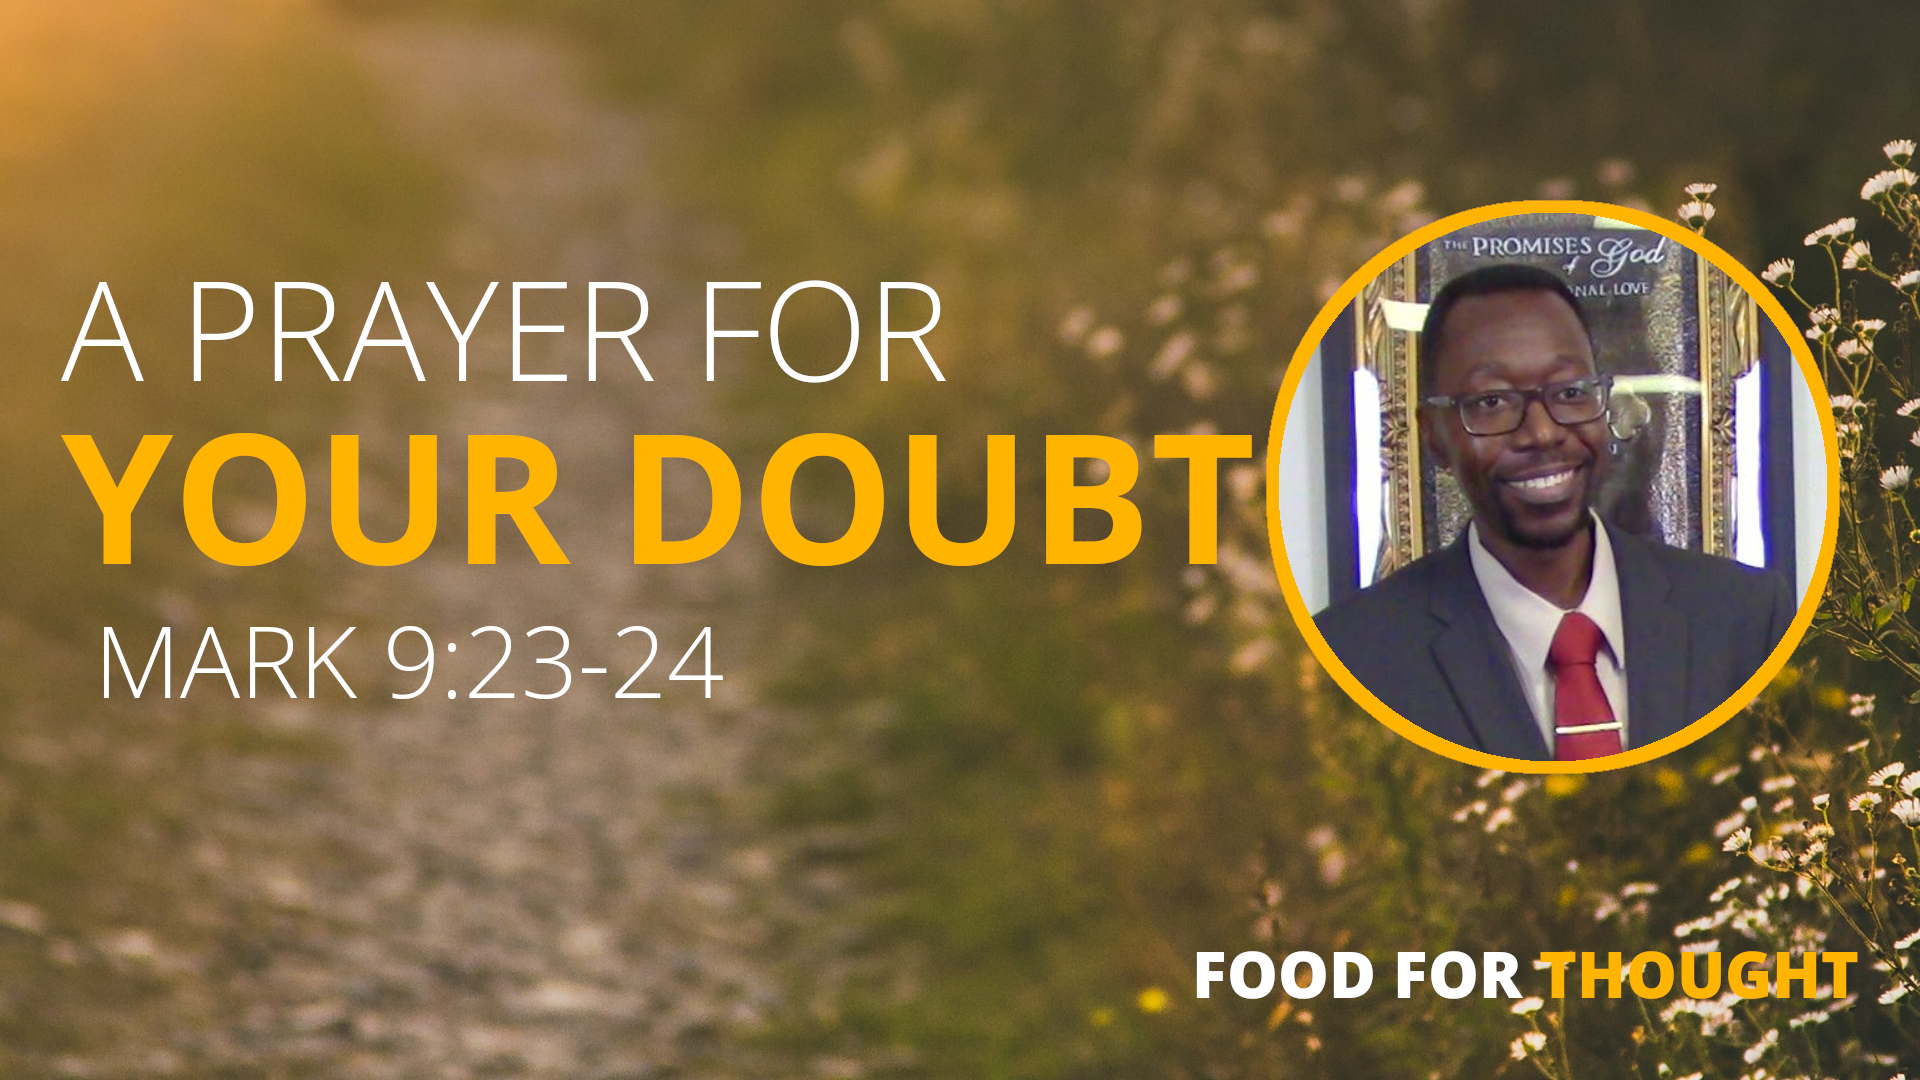 A Prayer for Doubt and Unbelief Banner